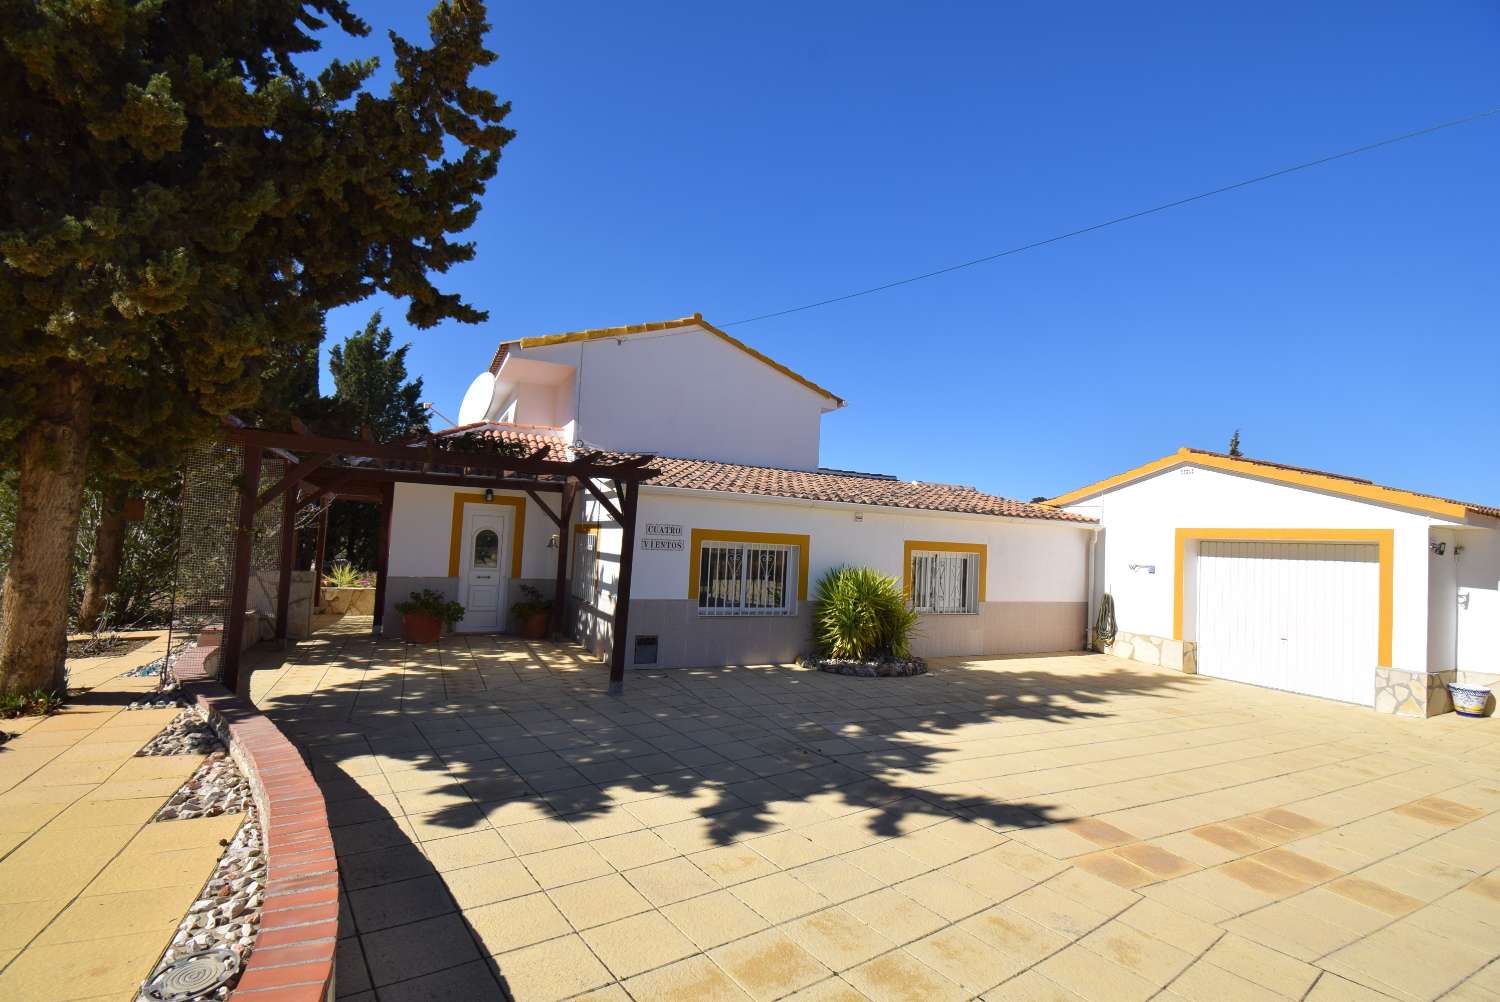 Fantastic country villa with annexe, garden, large pool and stunning mountain views